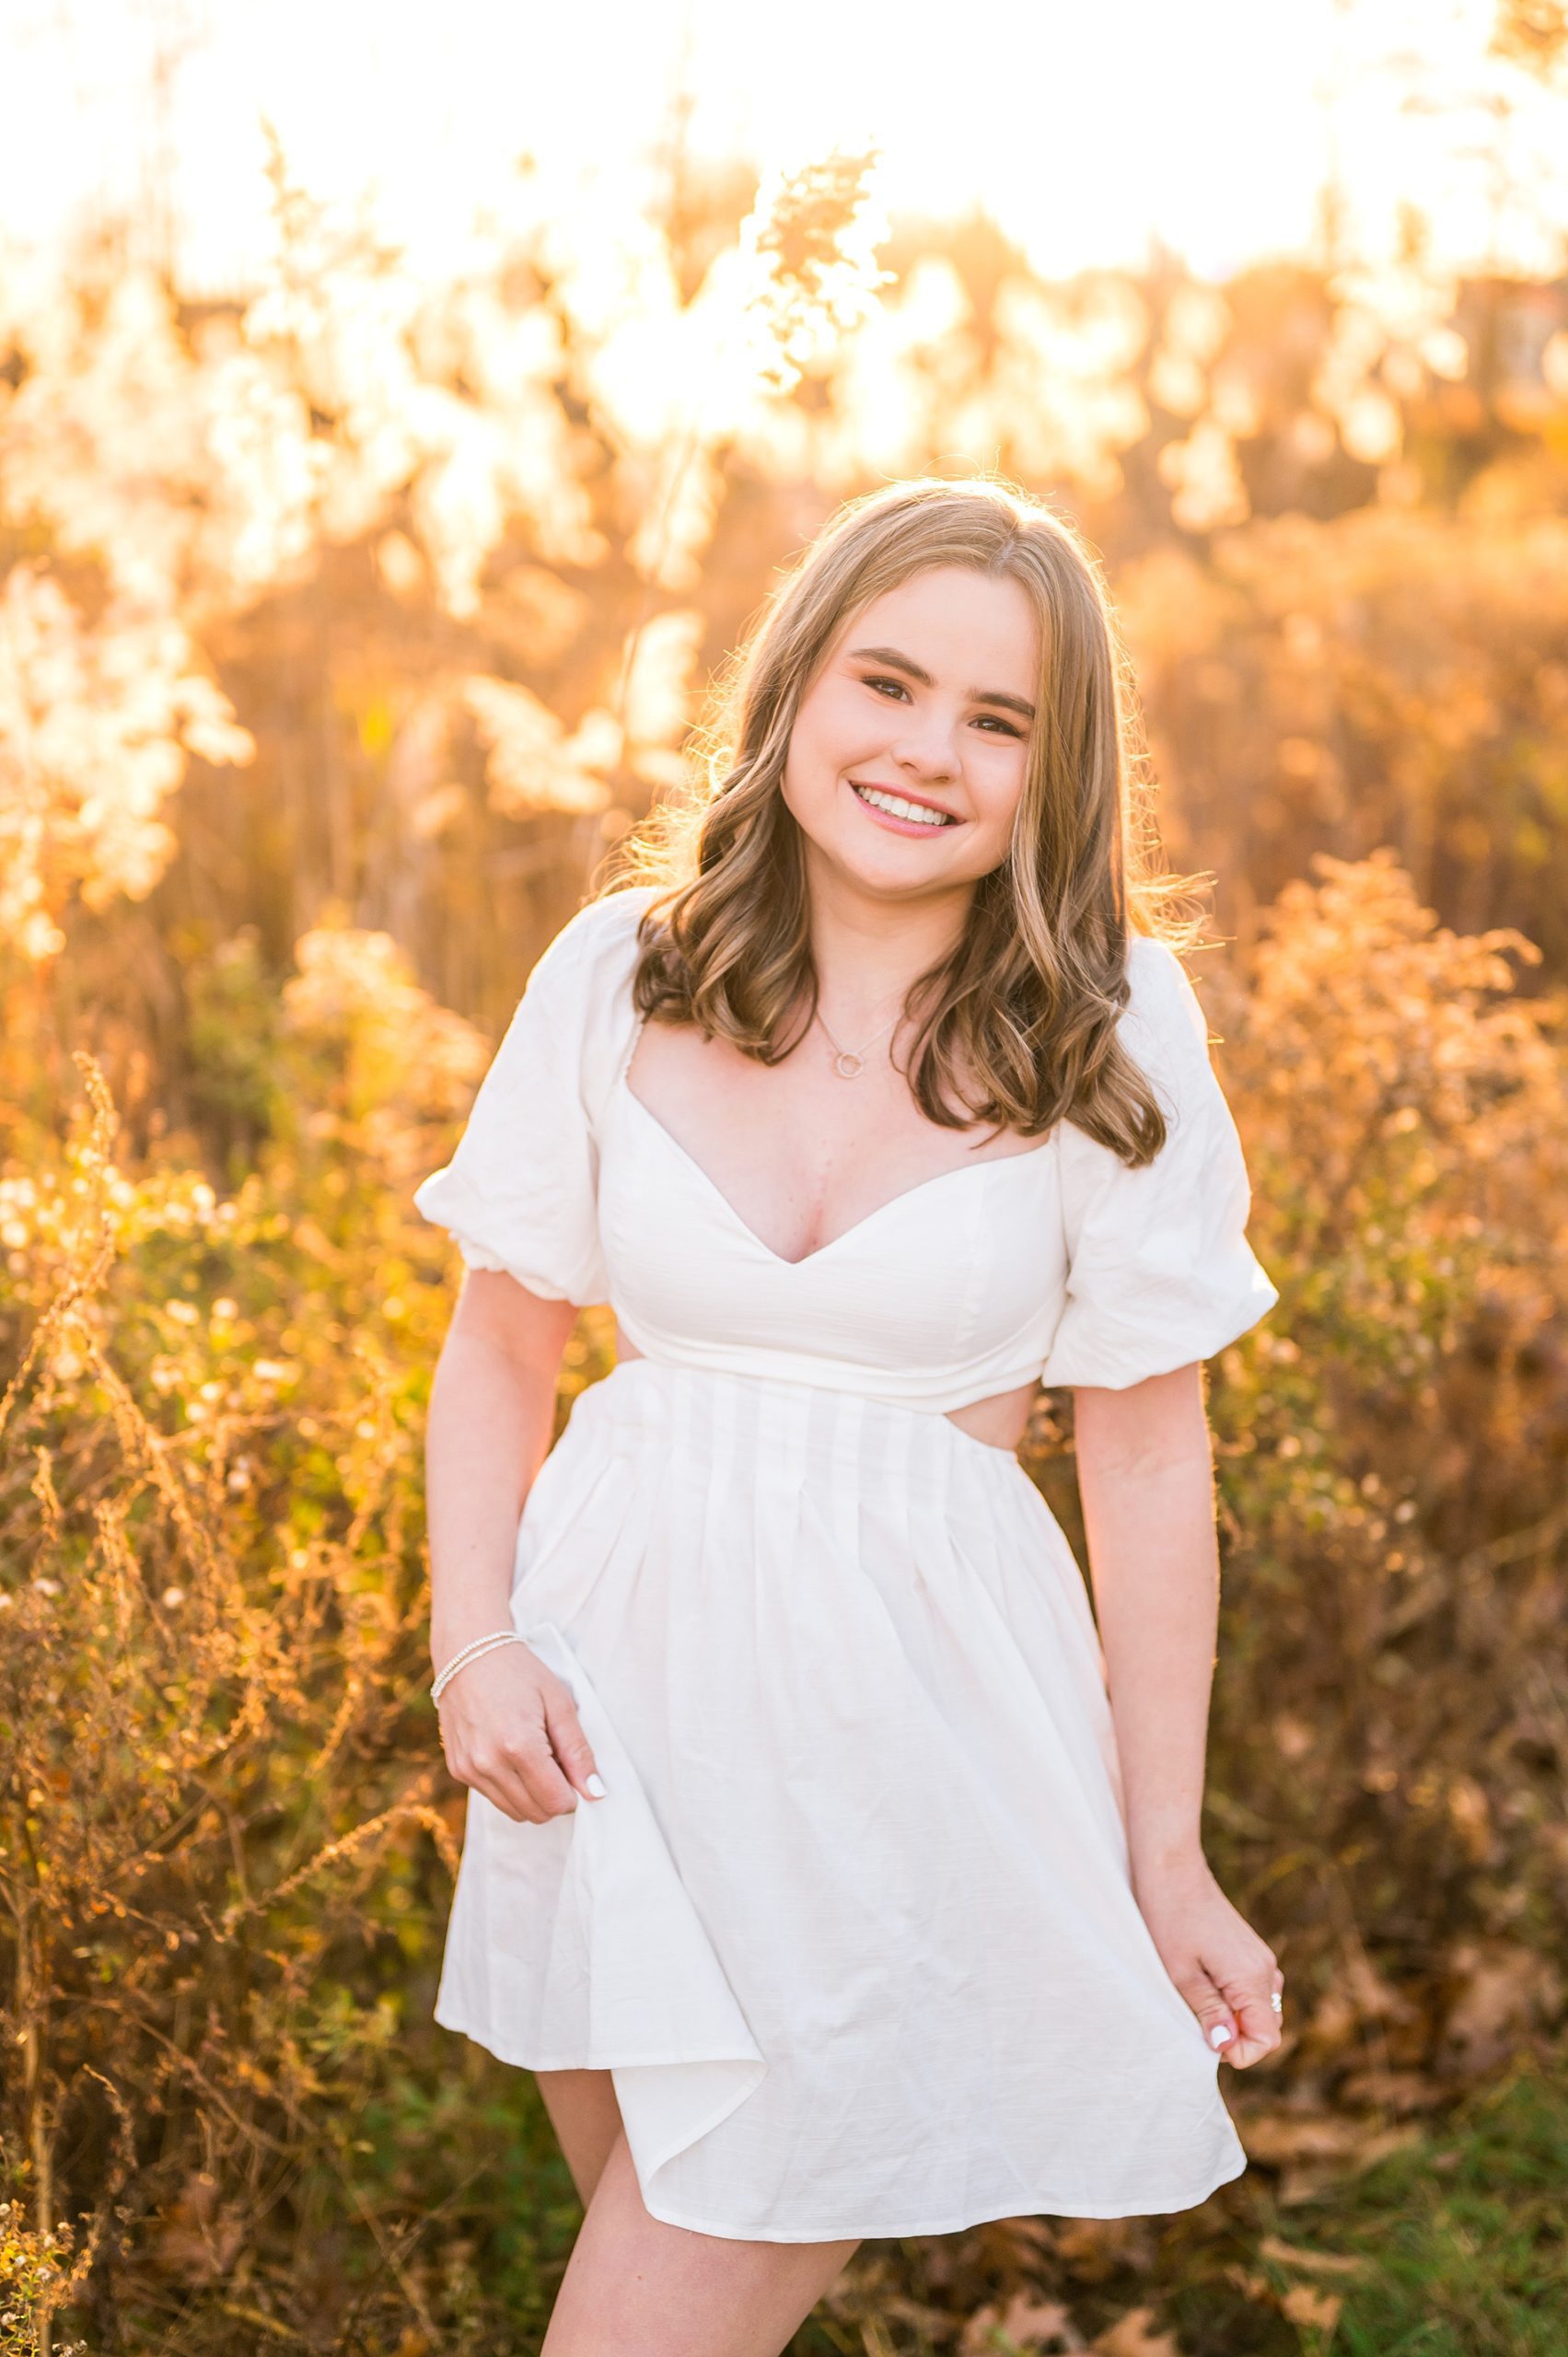 senior in white dress by field of tall grass